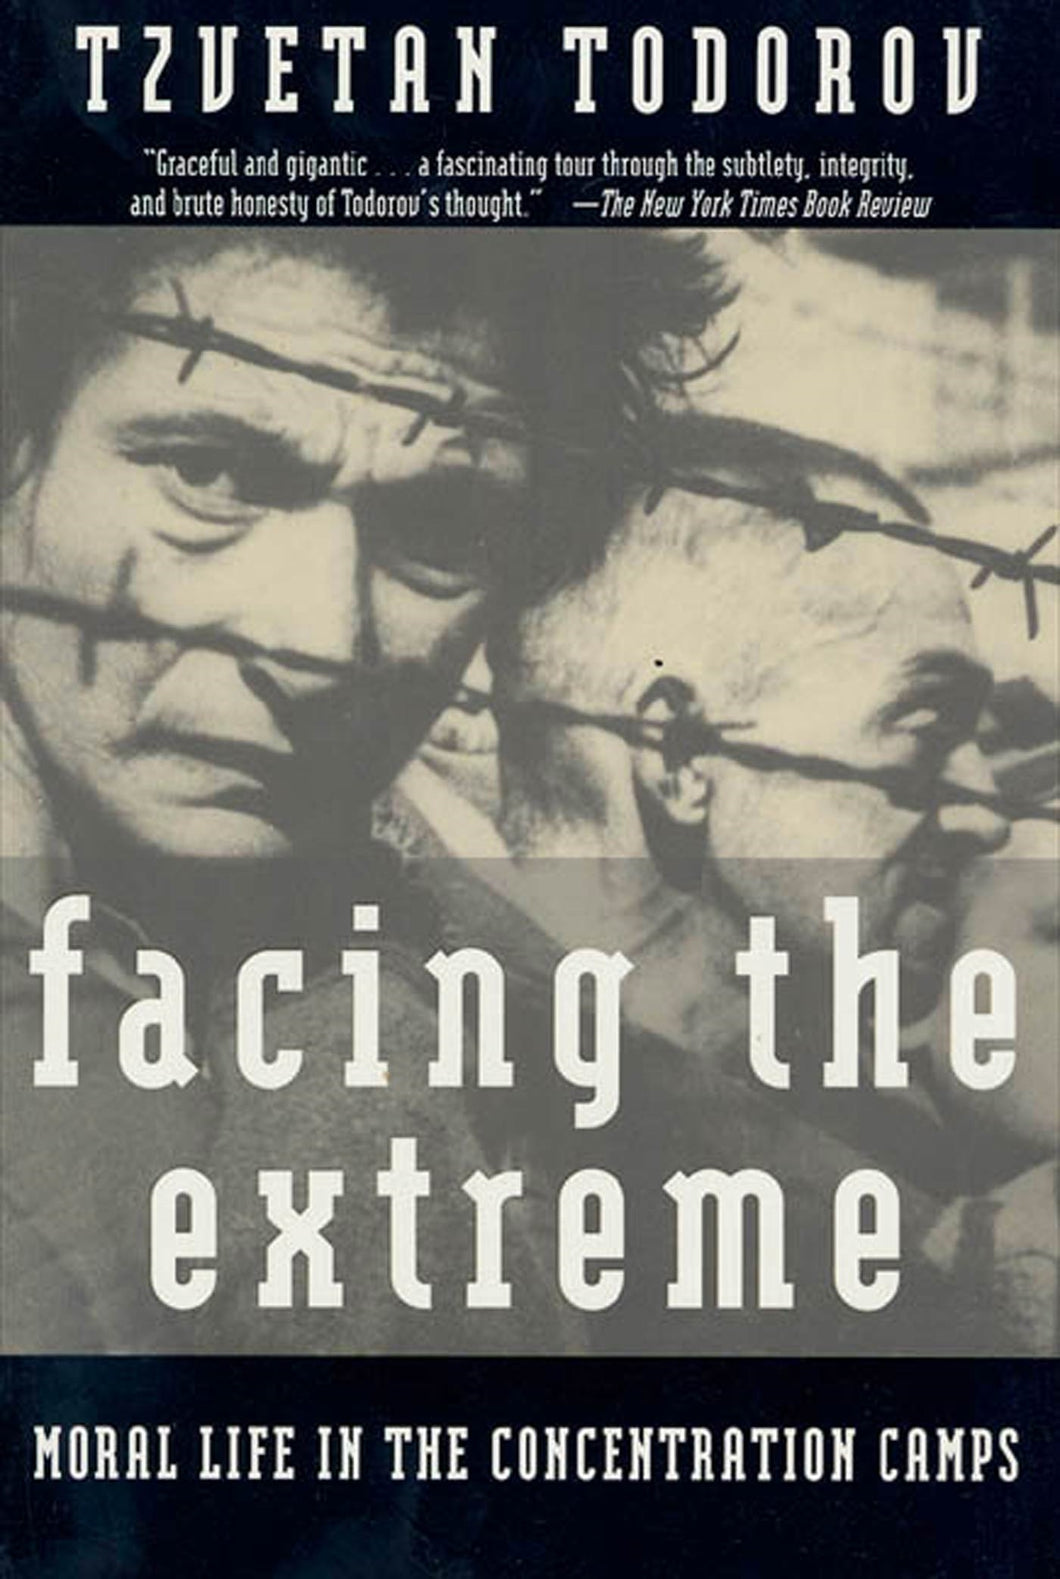 Facing The Extreme: Moral Life in the Concentration Camps